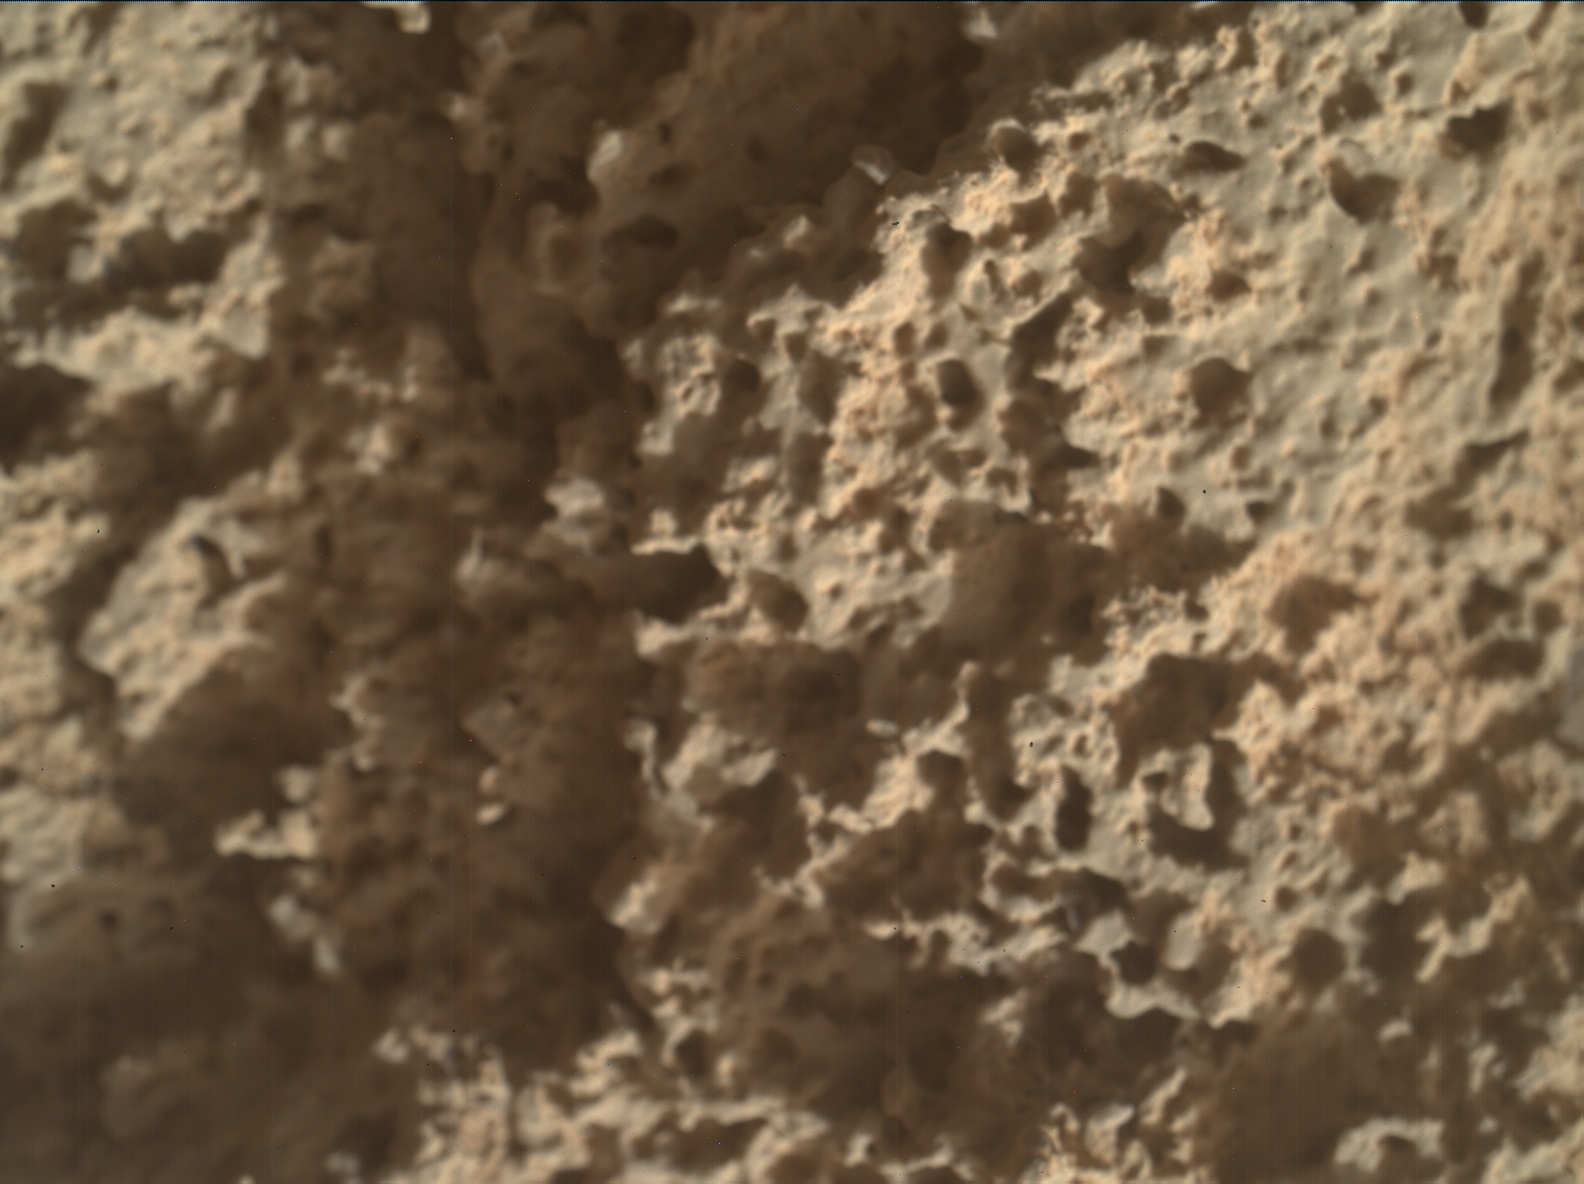 Nasa's Mars rover Curiosity acquired this image using its Mars Hand Lens Imager (MAHLI) on Sol 3583